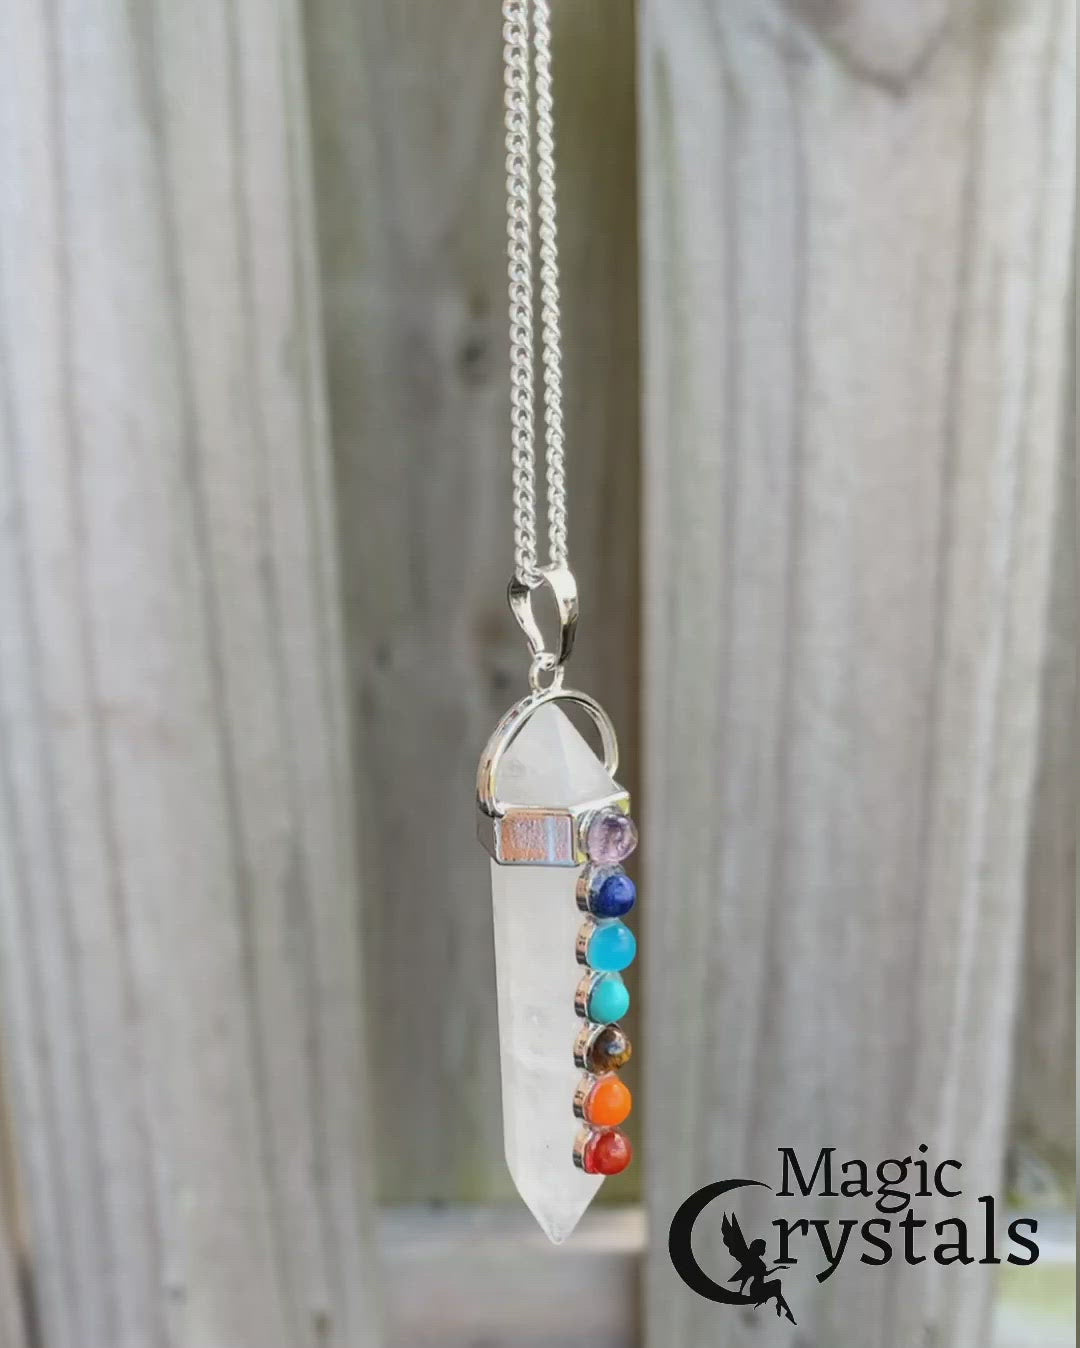 Enjoy free shipping on orders over $35 and easy returns every day at MagicCrystals.Com . This handmade Clear Quartz pendant features healing crystal beads representing each of the 7 Chakras. Check out our Clear Quartz pendant selection for the very best in unique or custom, handmade pieces.